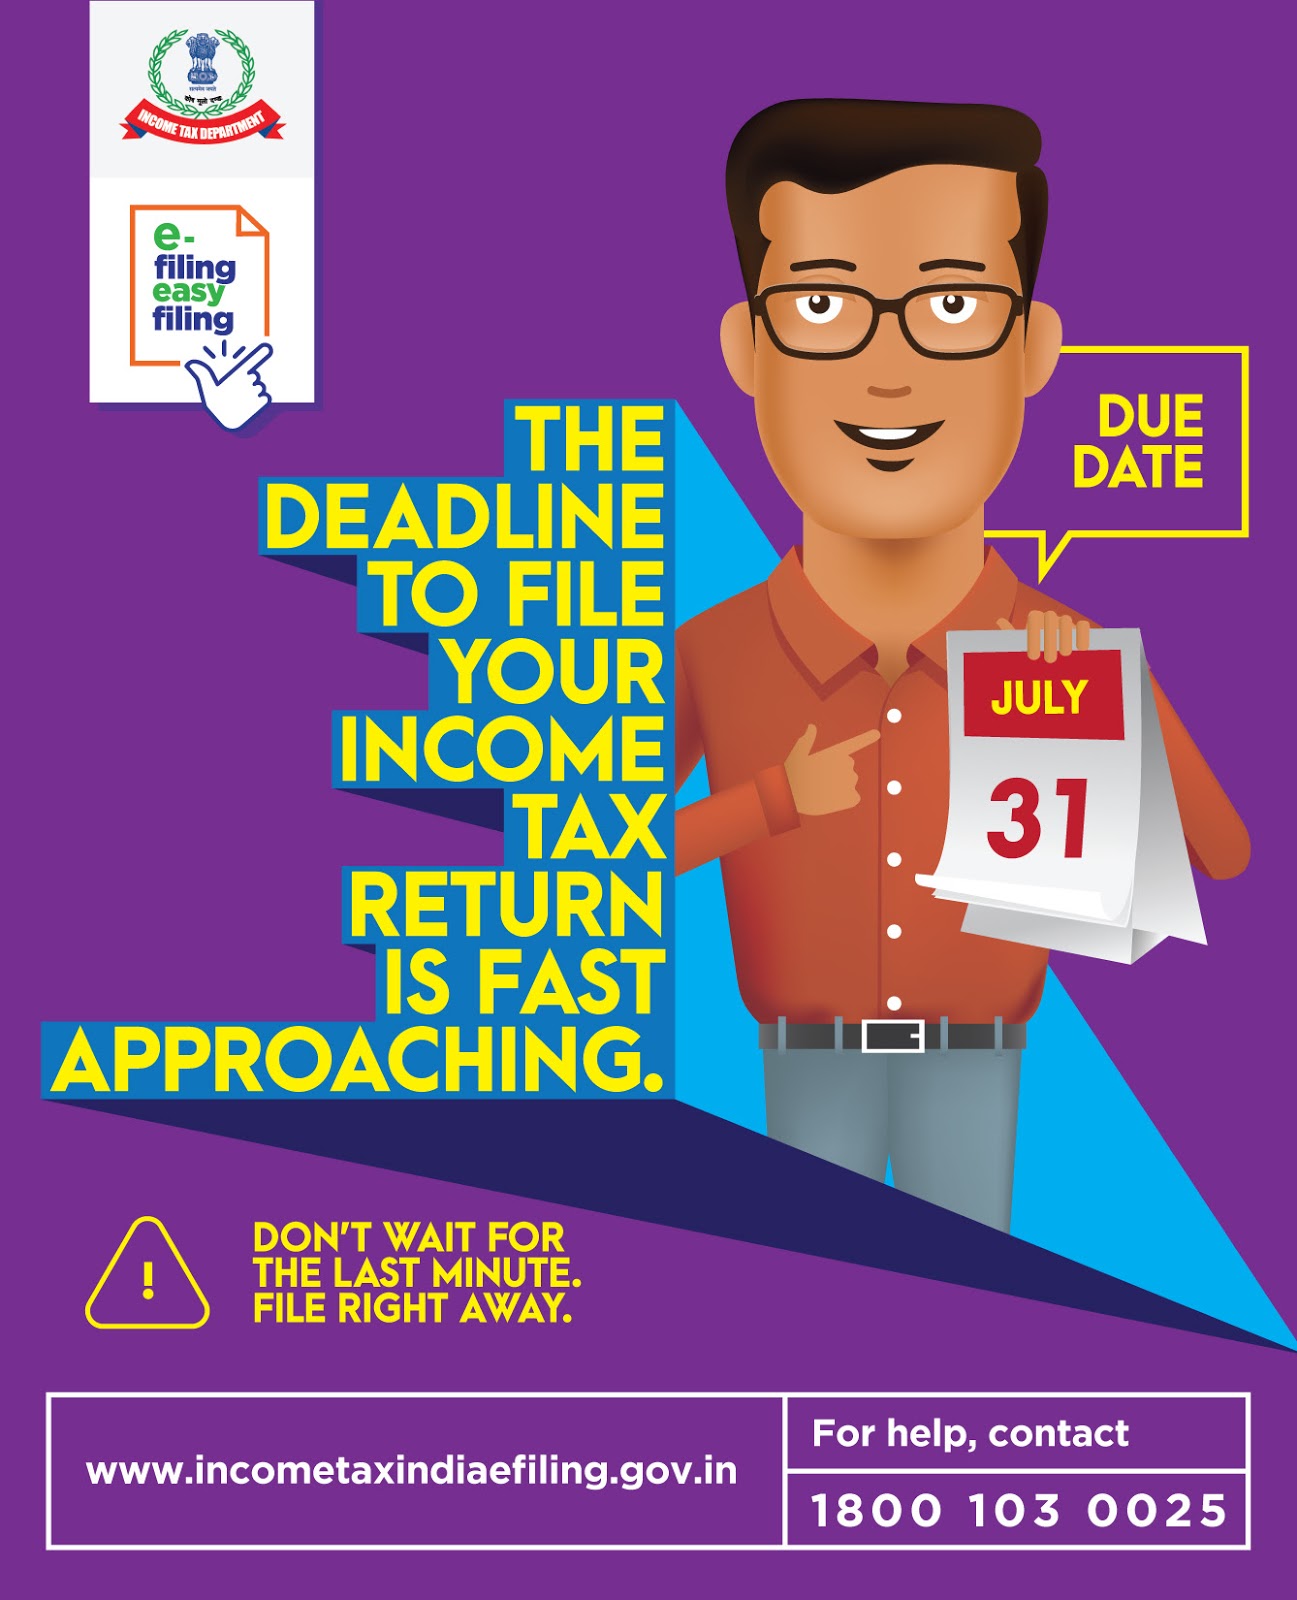 last-date-for-file-your-income-tax-return-31-july-2019-sa-post